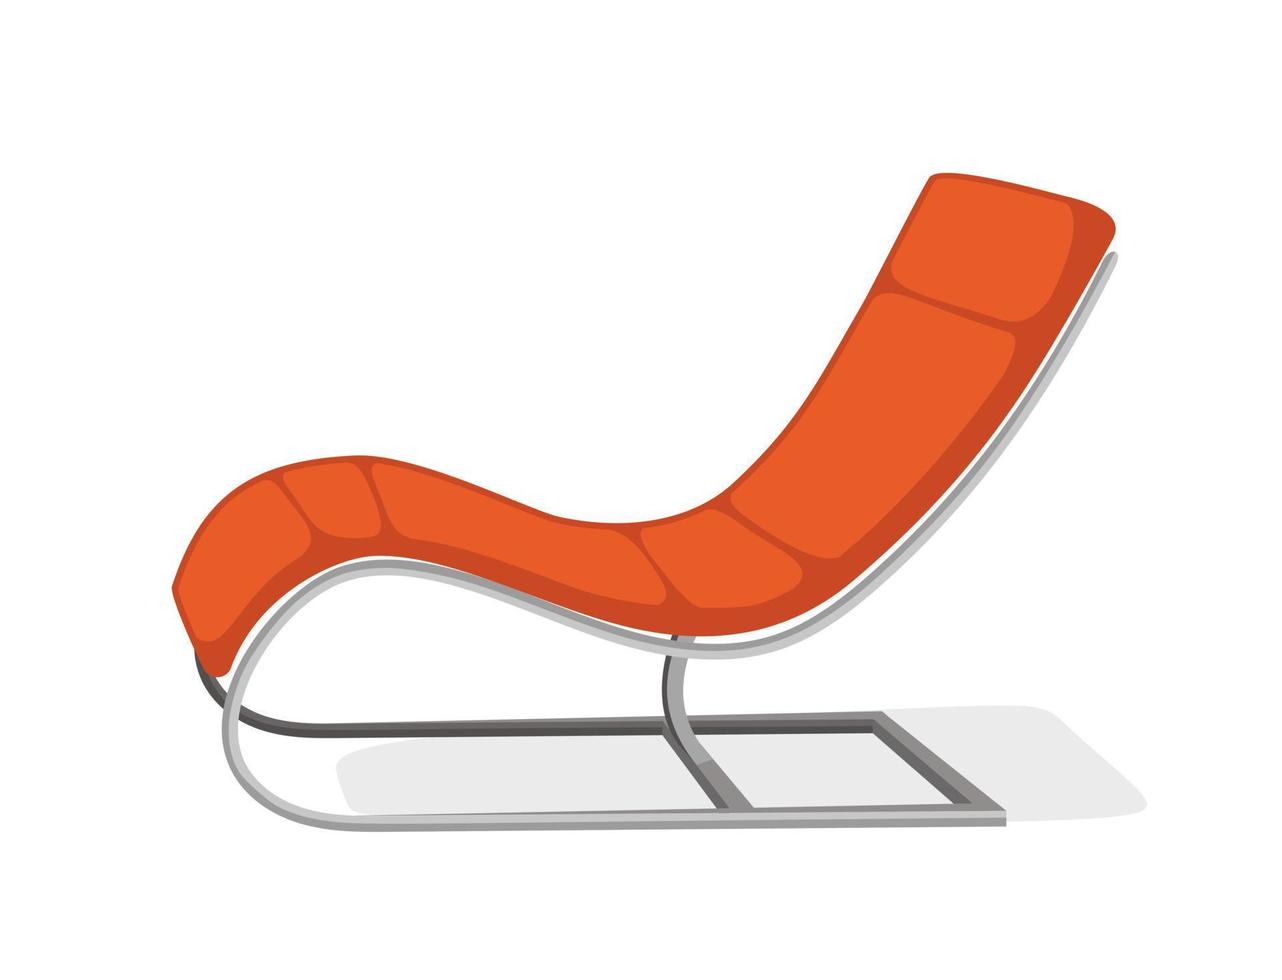 Armchair sofa orange Modern interior furniture Vector illustration in a flat style isolated